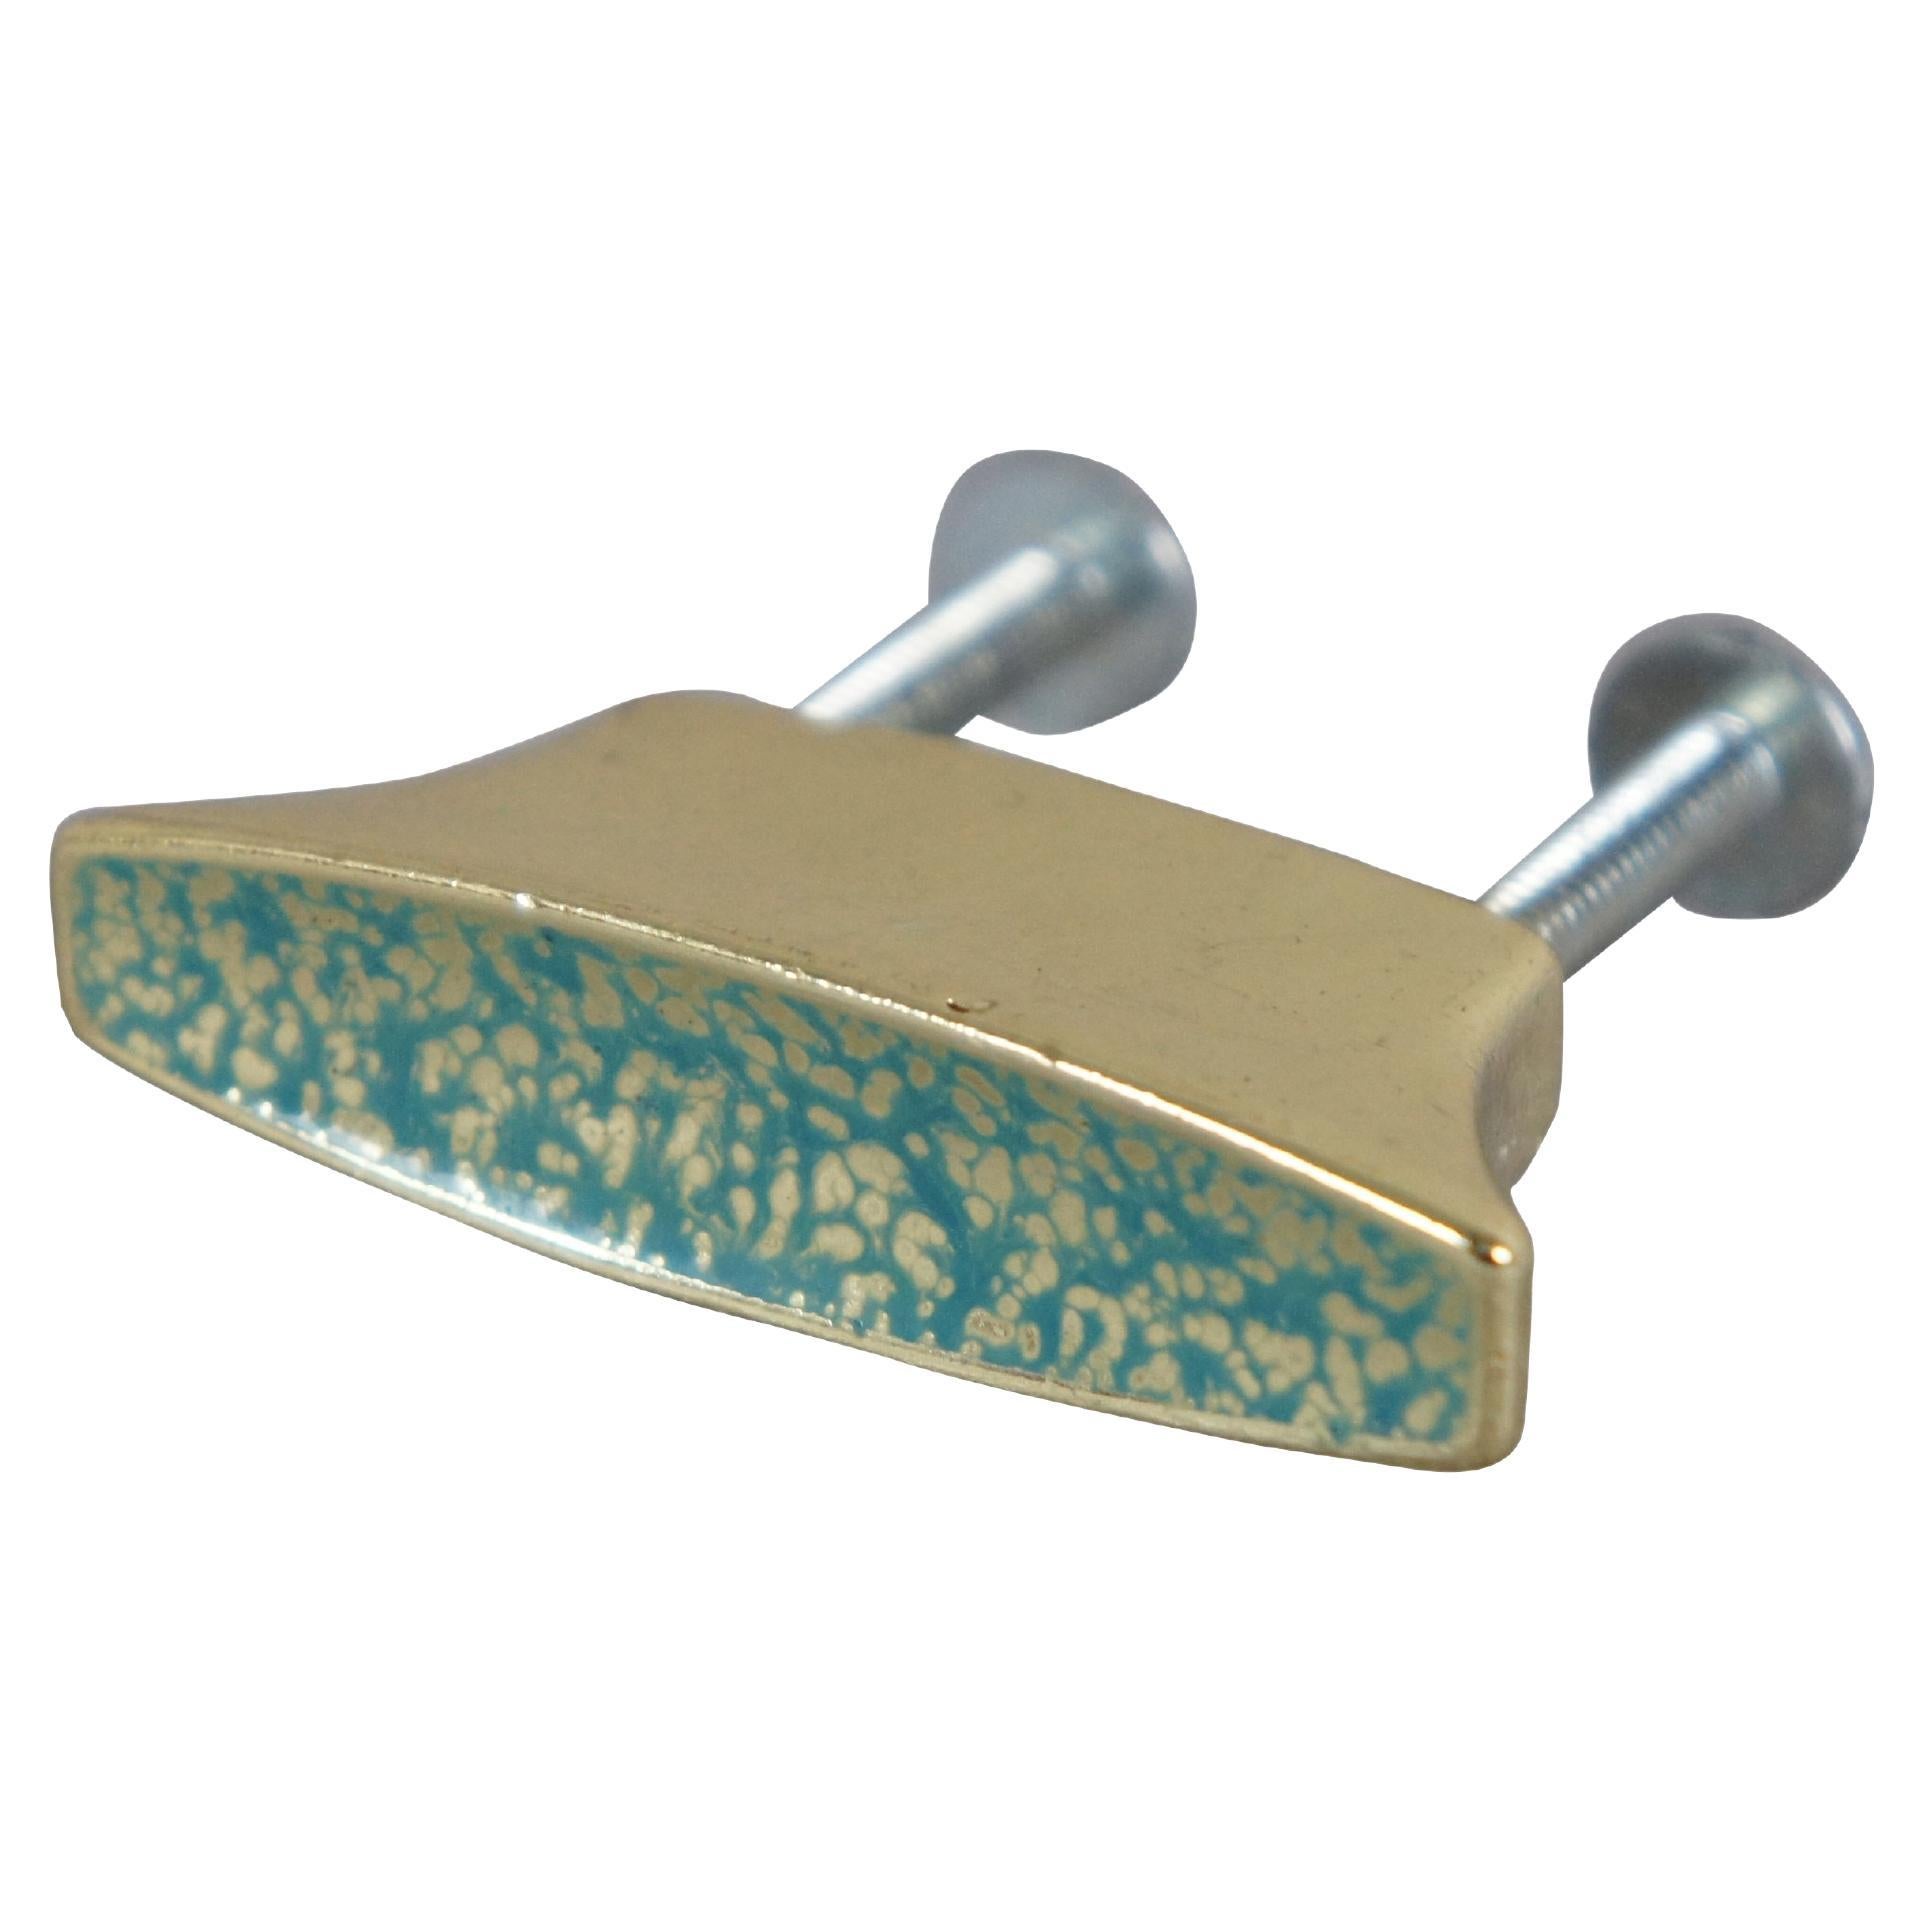 National Lock Medalist C697-3CT Century 21 Knob Brass Turquoise Drawer Pulls MCM For Sale